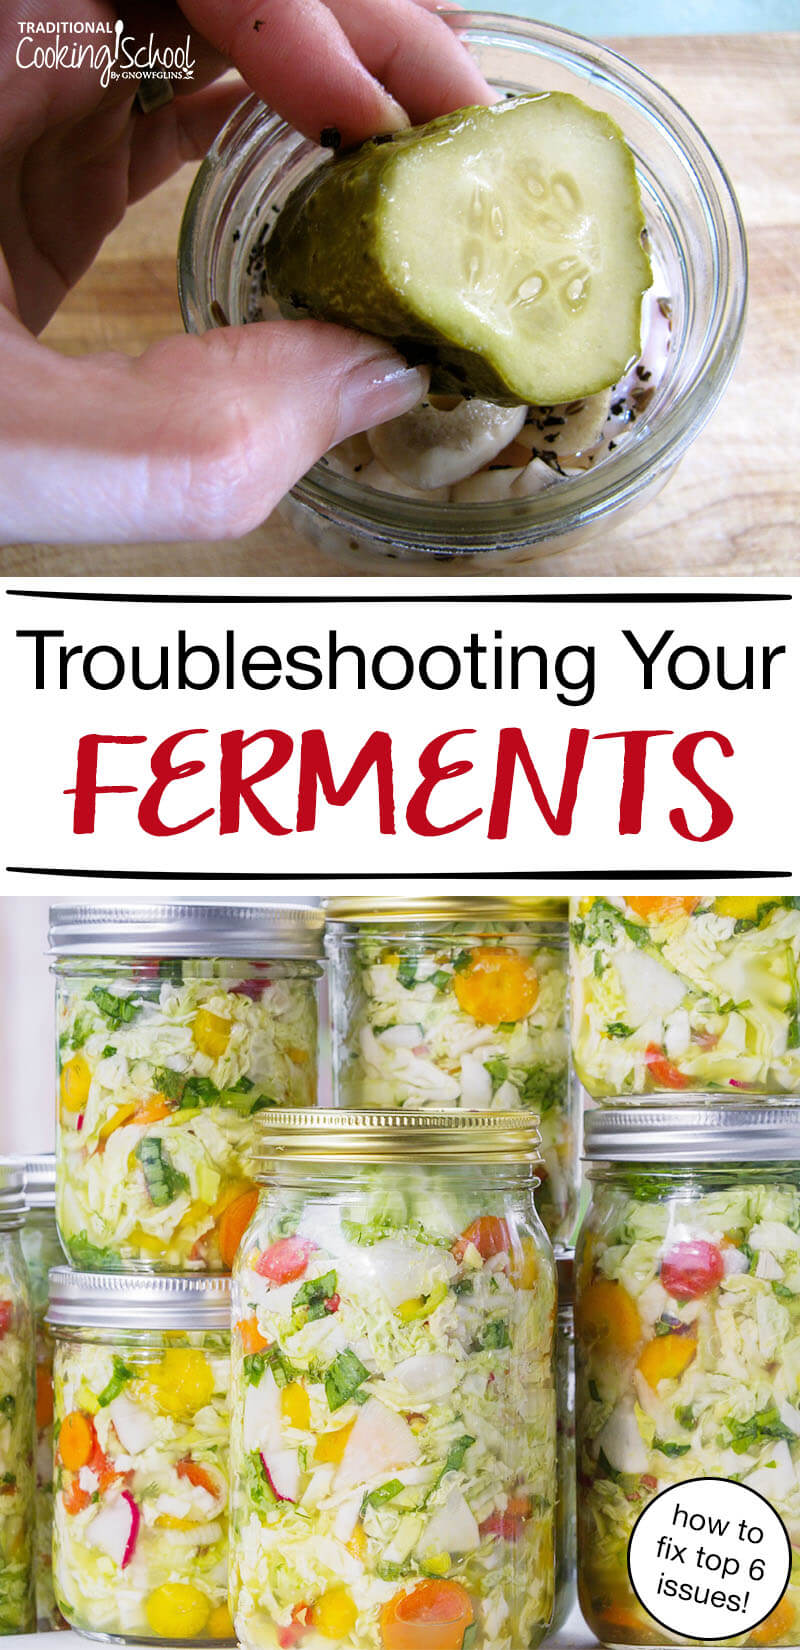 Troubleshooting Your Ferments (KYF172) | Even though it's safe and easy, fermentation problems do come up now and then. Today we're all about troubleshooting ferments. Whether it's not bubbling, it's mushy, or you just don't like it. Watch, listen, or read to get the answers for your common fermenting problems. | KnowYourFoodPodcast.com/172